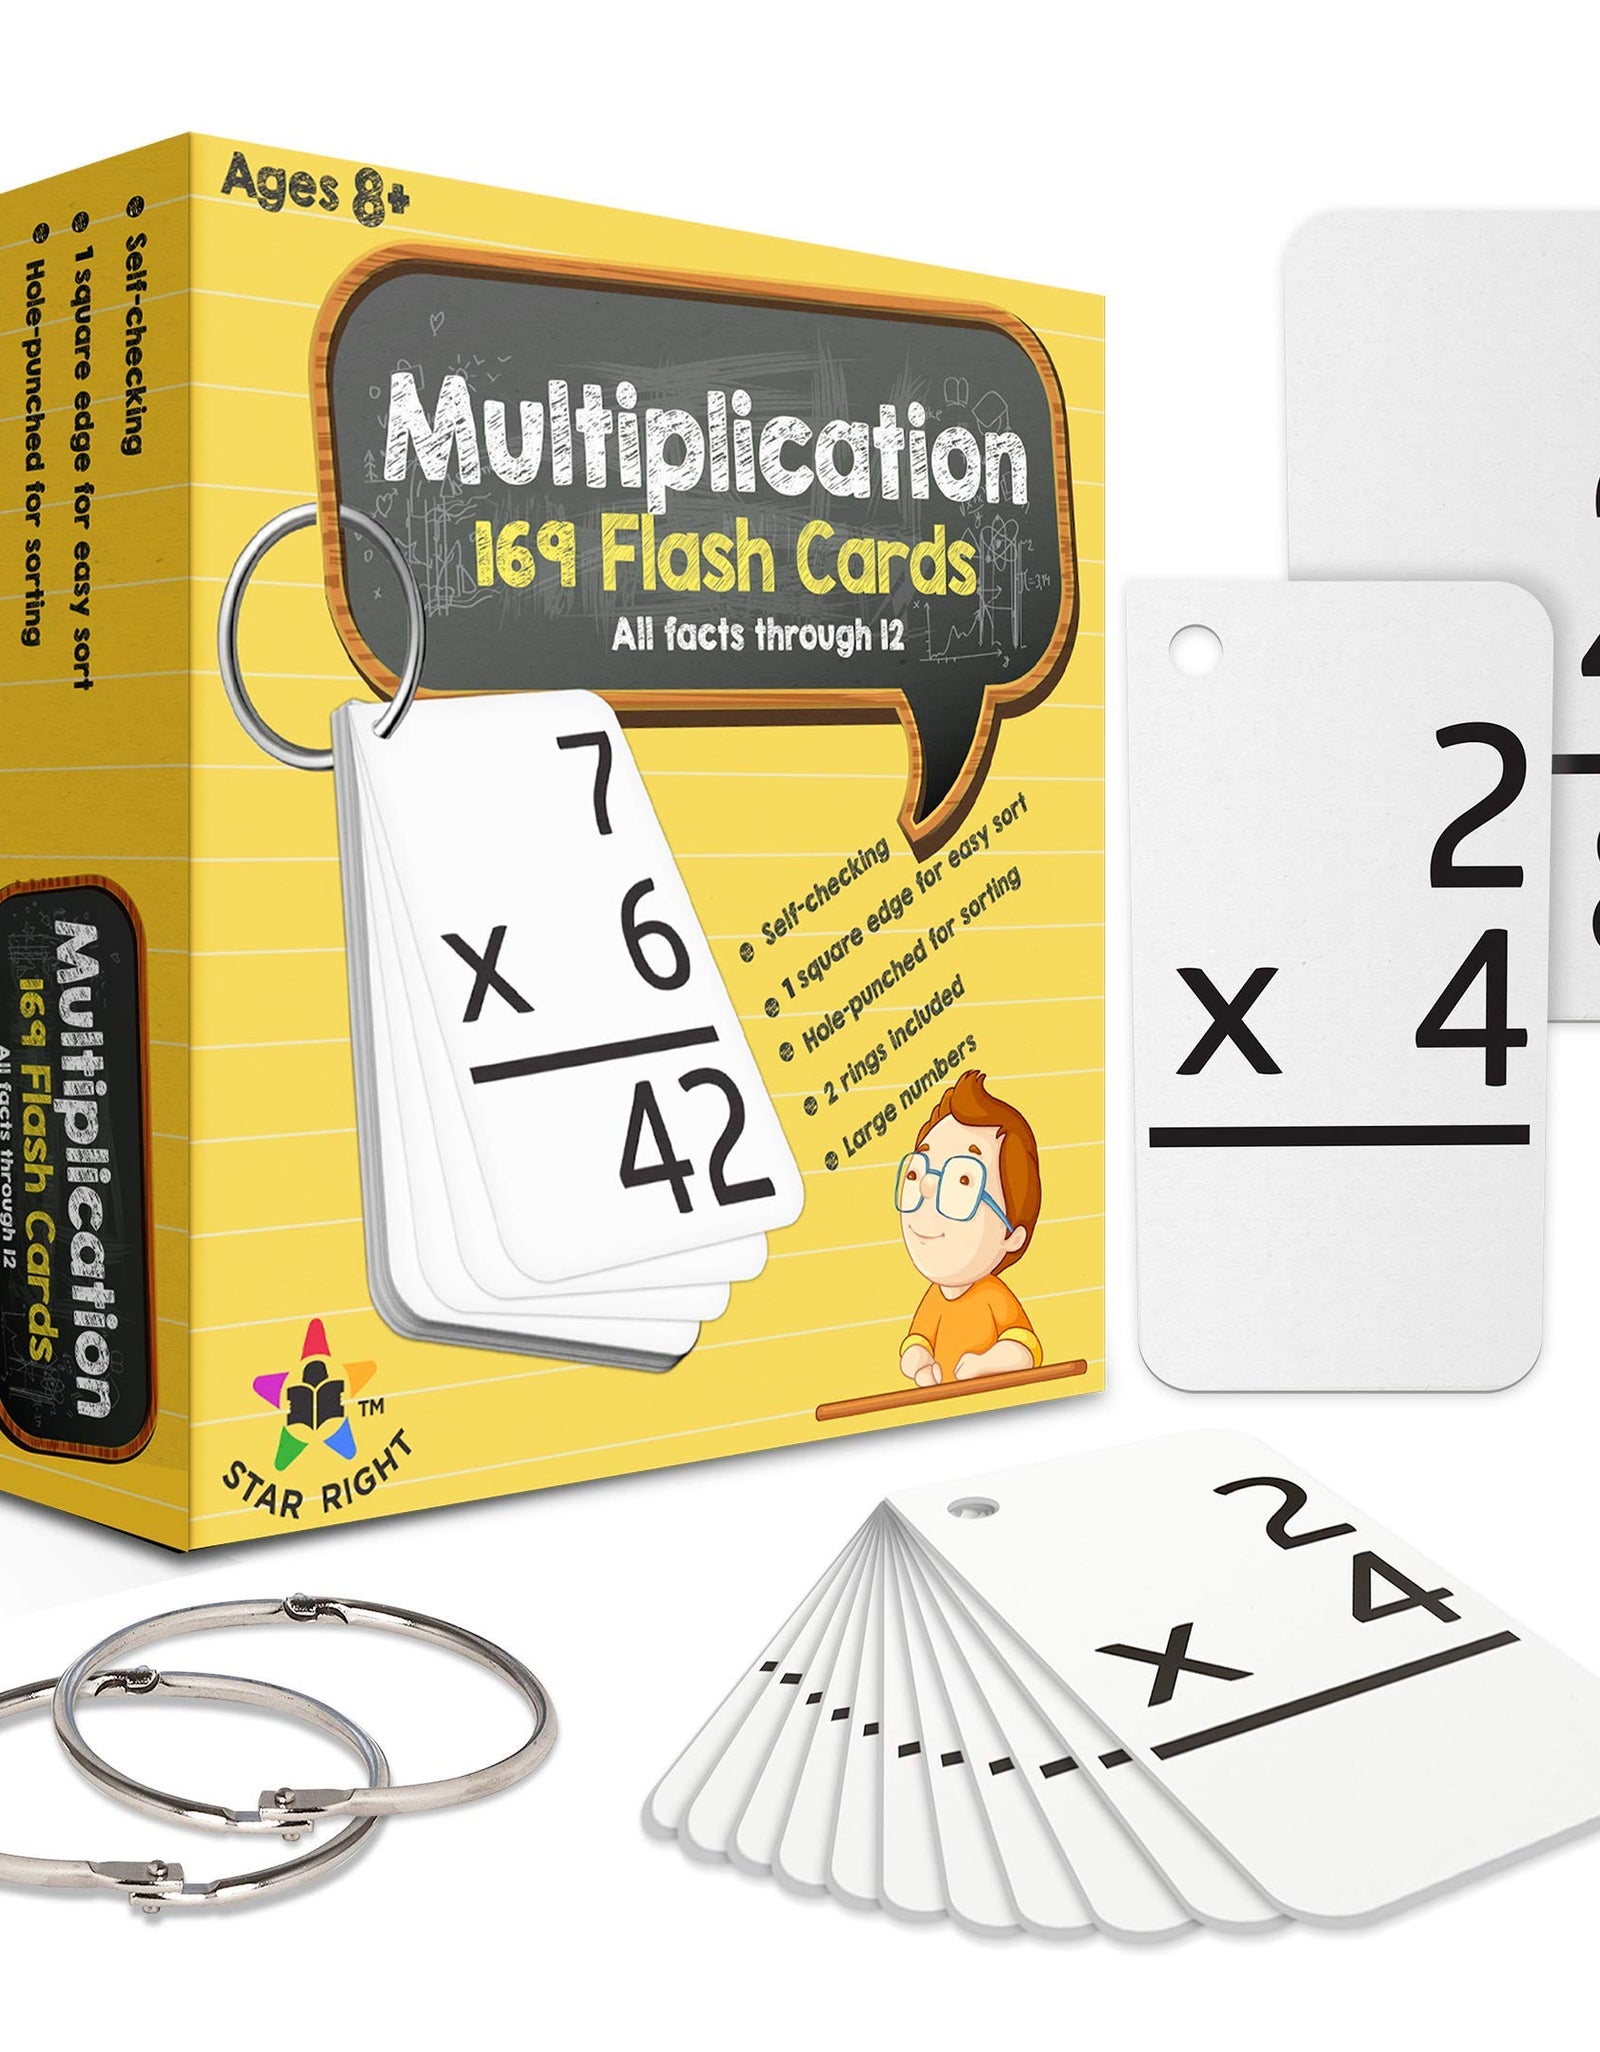 Star Right Math Flash Cards - Multiplication Flash Cards - 169 Hole Punched Math Game Flash Cards - 2 Binder Rings - for Ages 8 and Up - 3rd, 4th, 5th and 6th Grade